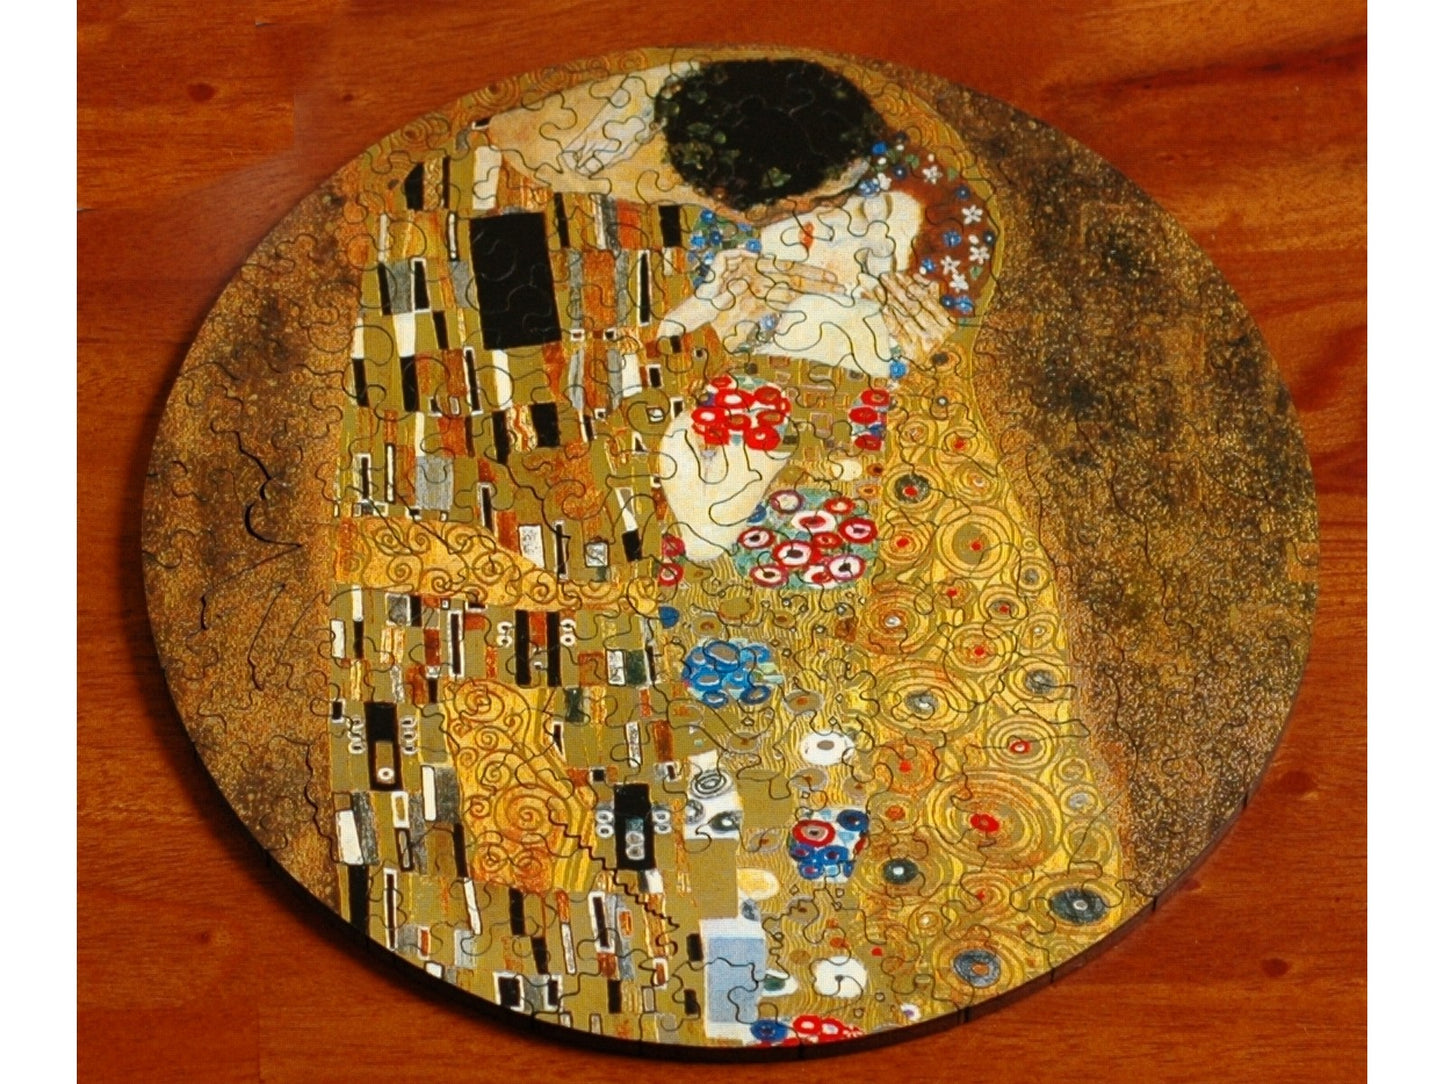 The front of the puzzle, The Kiss round, which shows two people embracing.